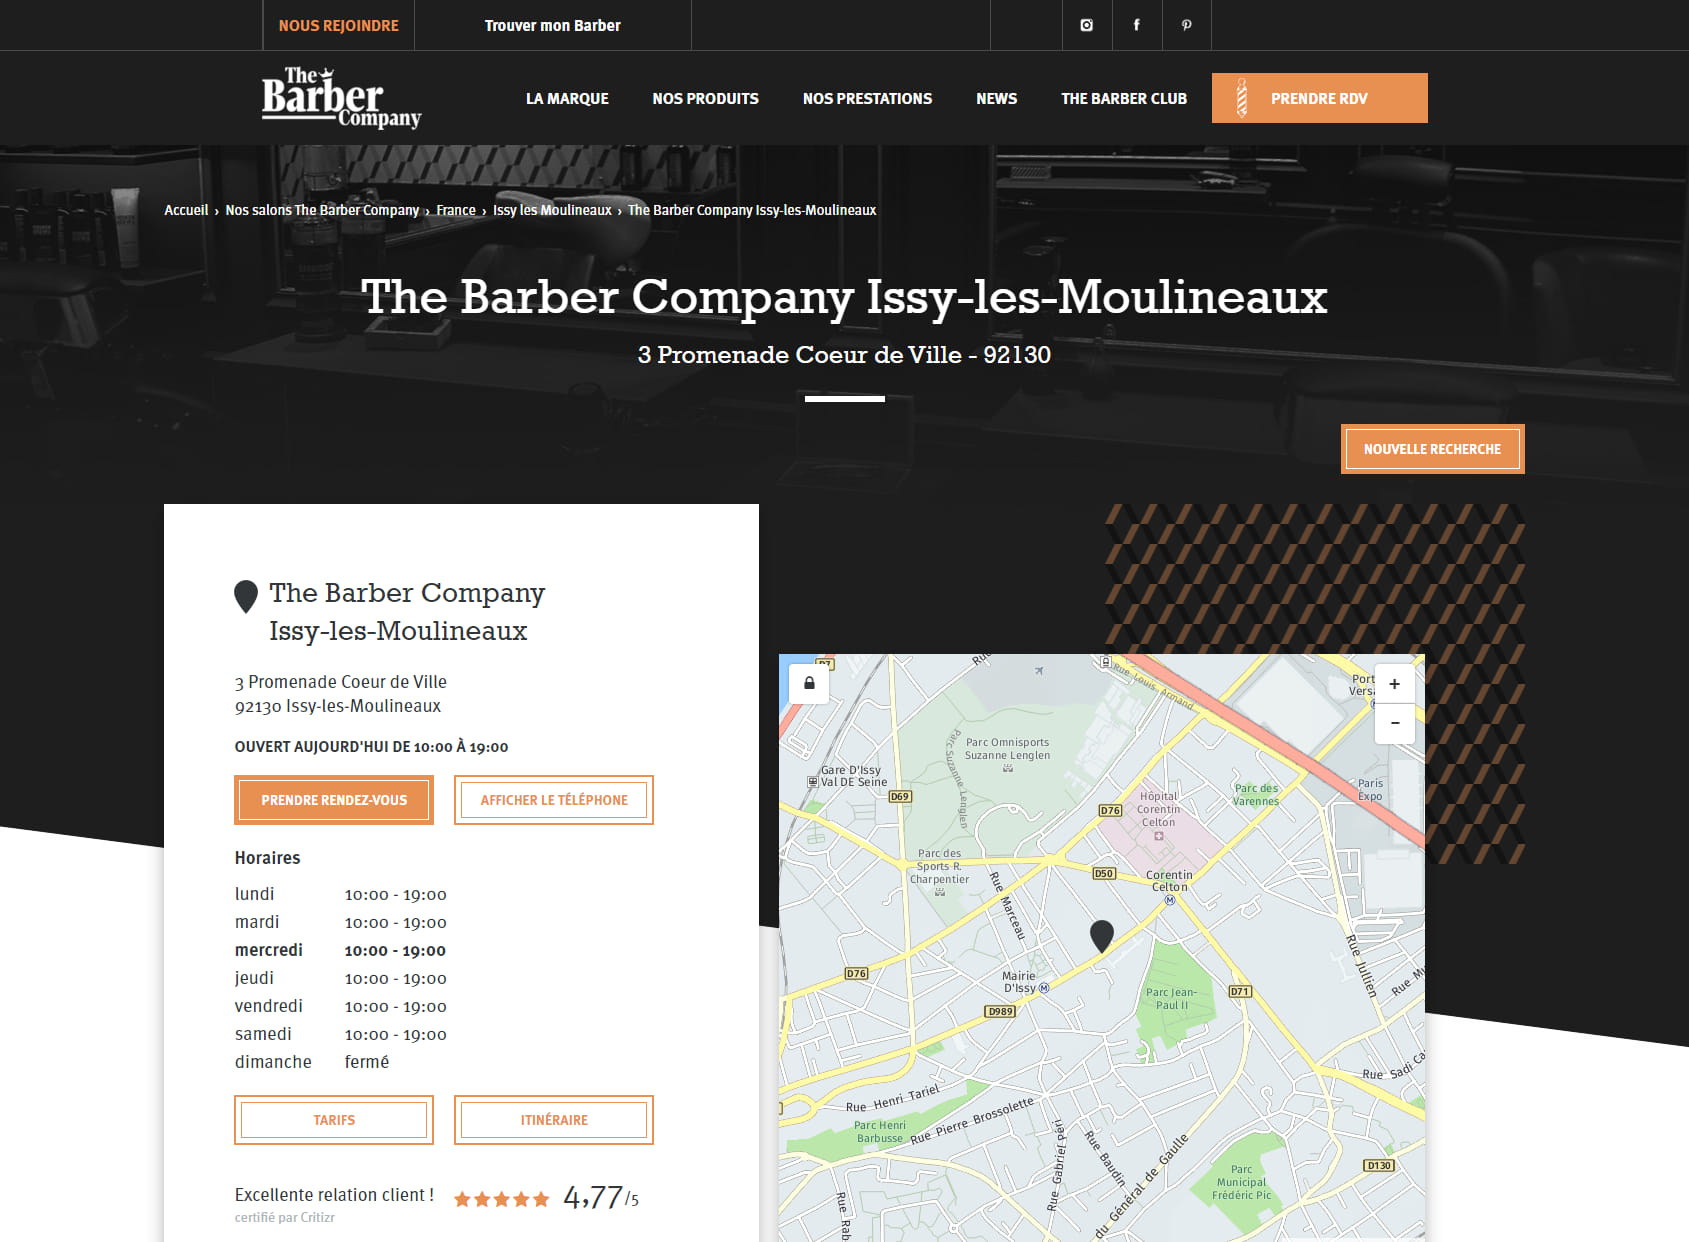 The Barber Company - Coiffeur Barbier Issy-les-Moulineaux